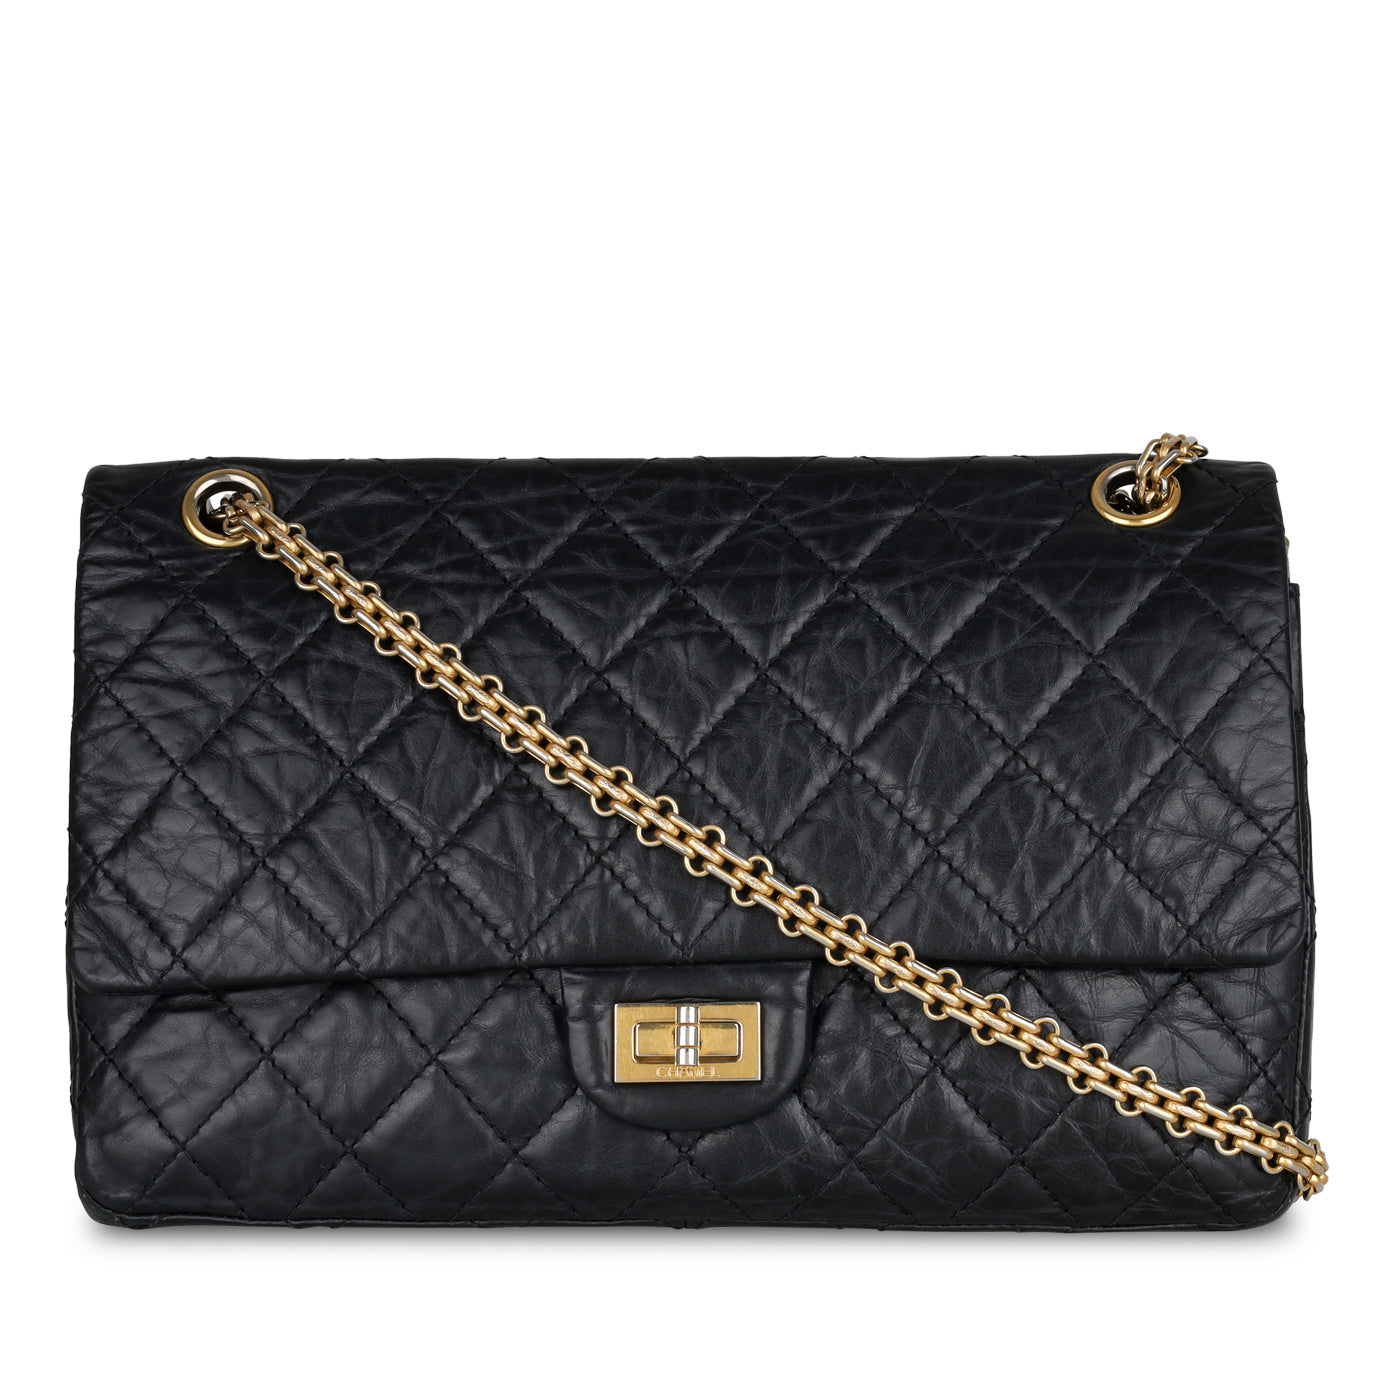 CHANEL Iridescent Caviar Quilted 2.55 Reissue 226 Flap Beige